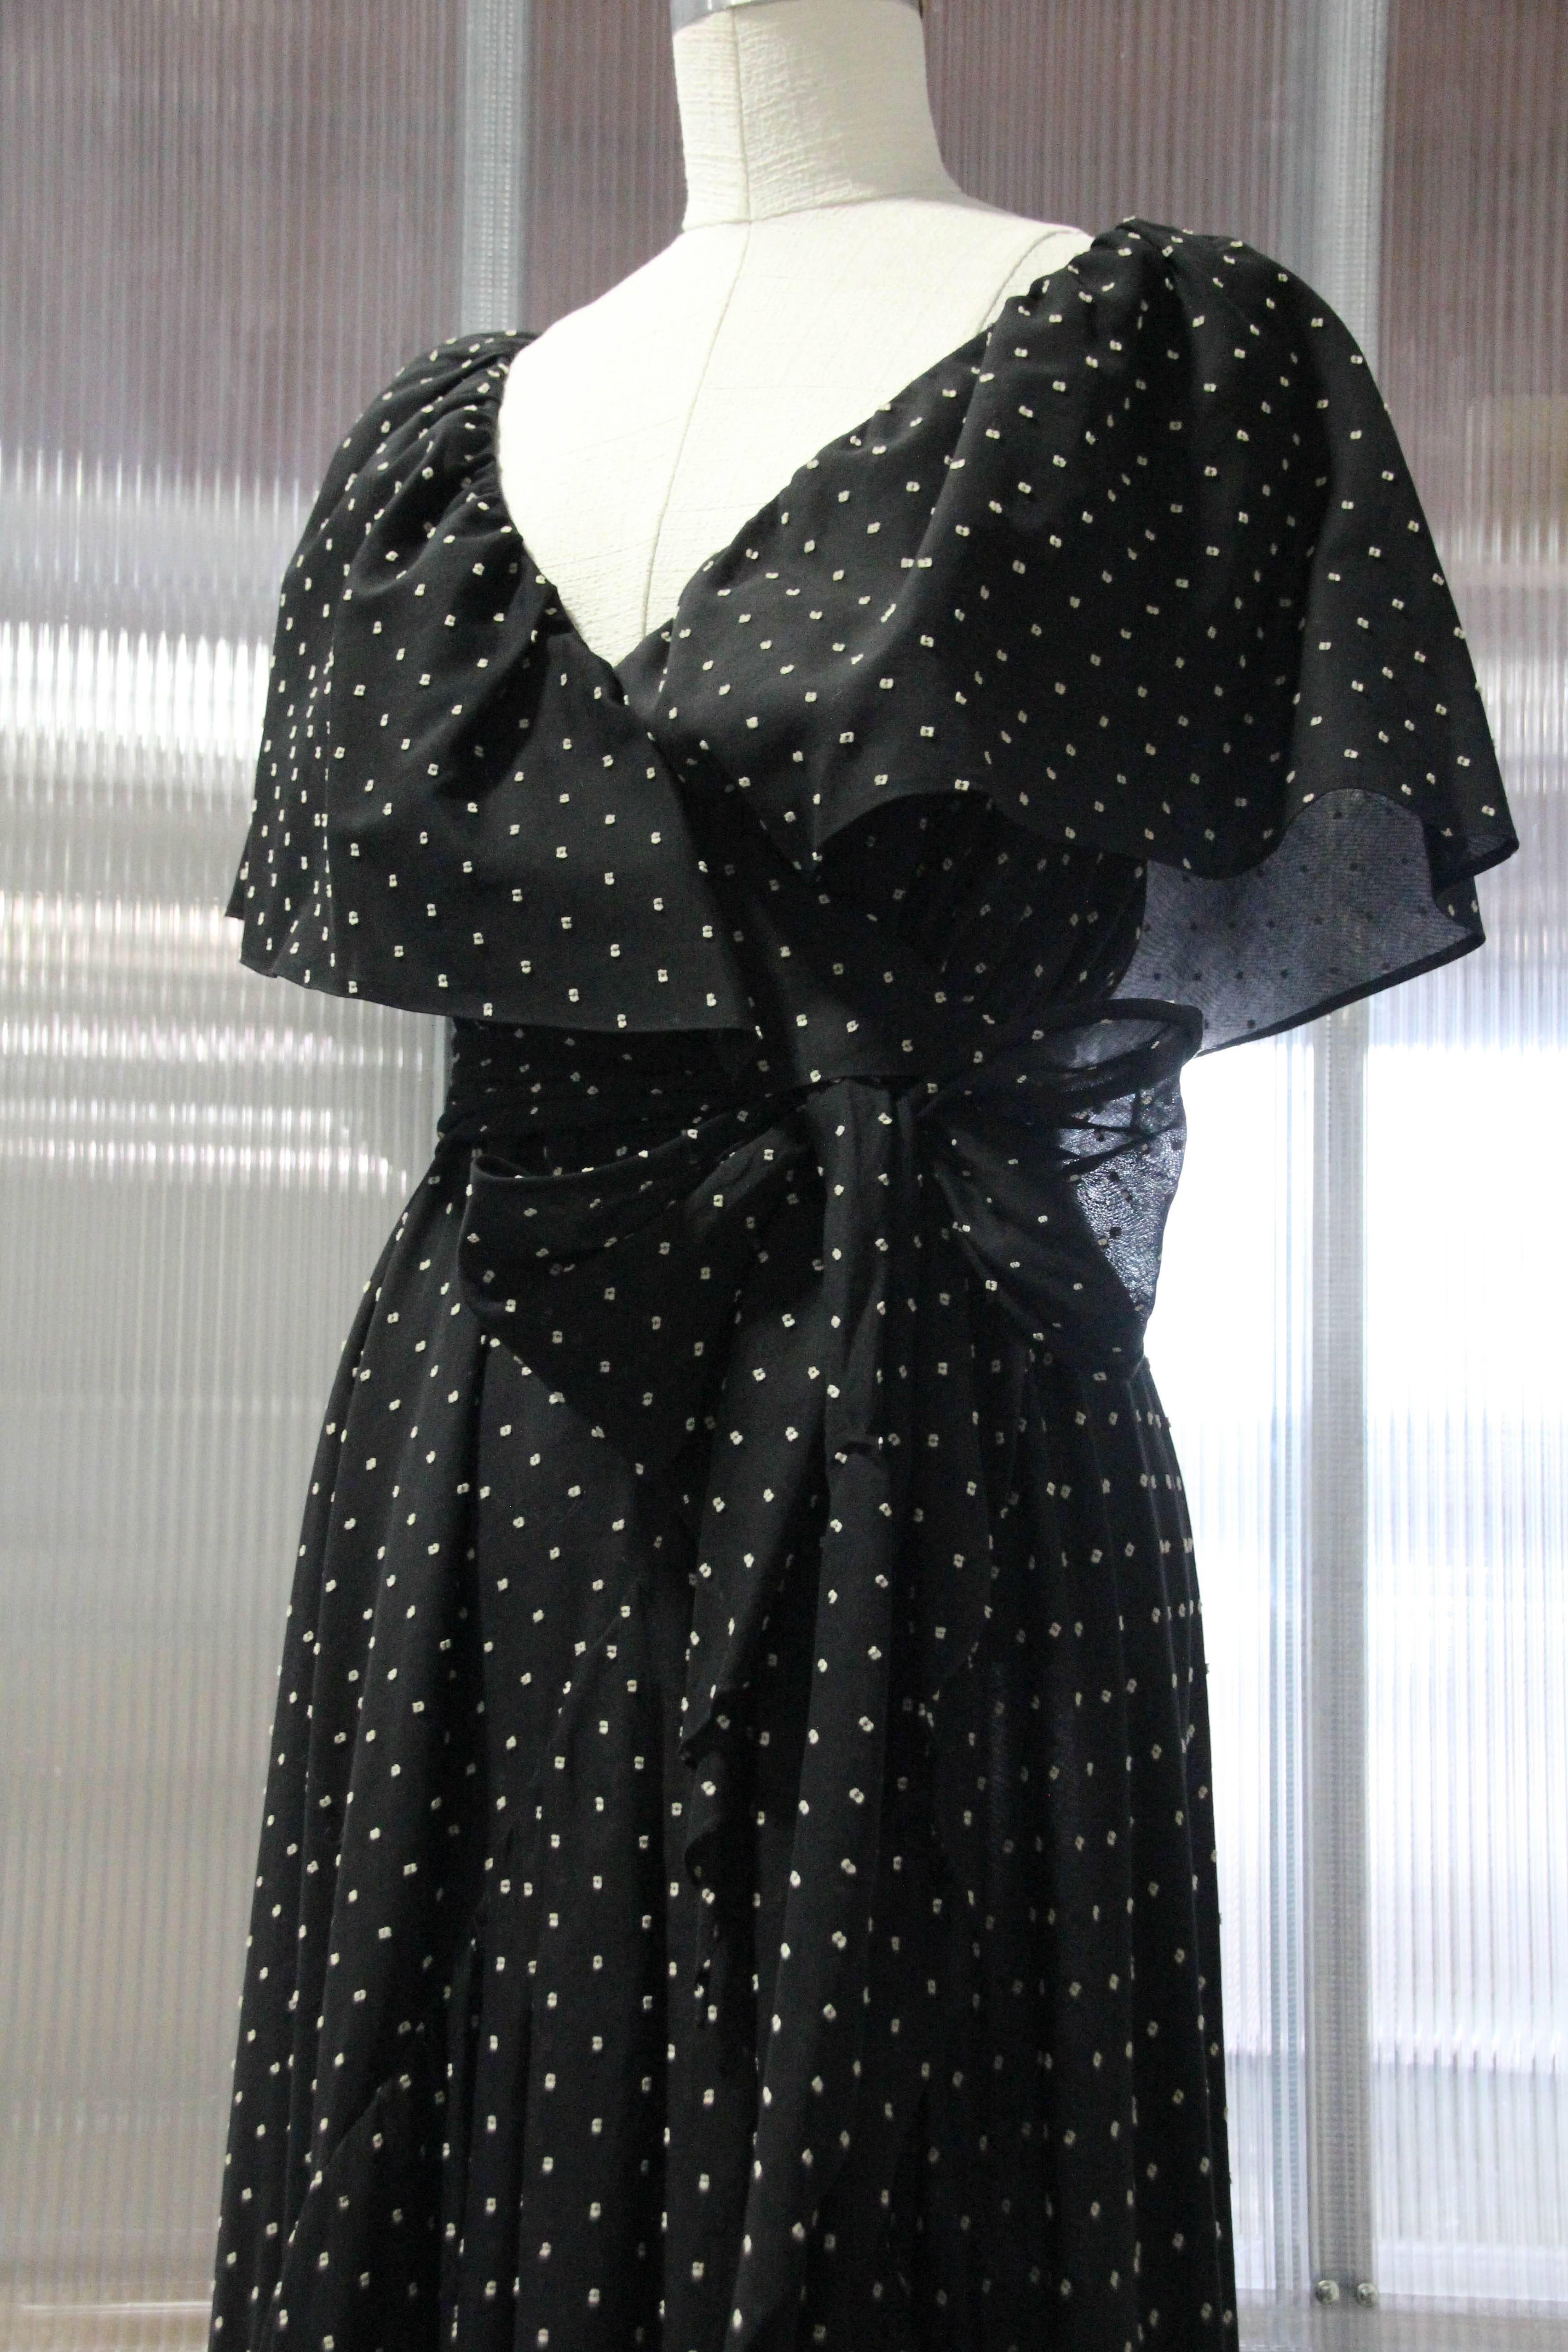 A beautiful 1980s Halston dotted cotton voile wrap-style gown with ruffled collar and fitted waist. Structured inside for support with a waist band grosgrain ribbon. Bowed sash at waist. Sexy leg exposure.
Iconic Halston construction and style!